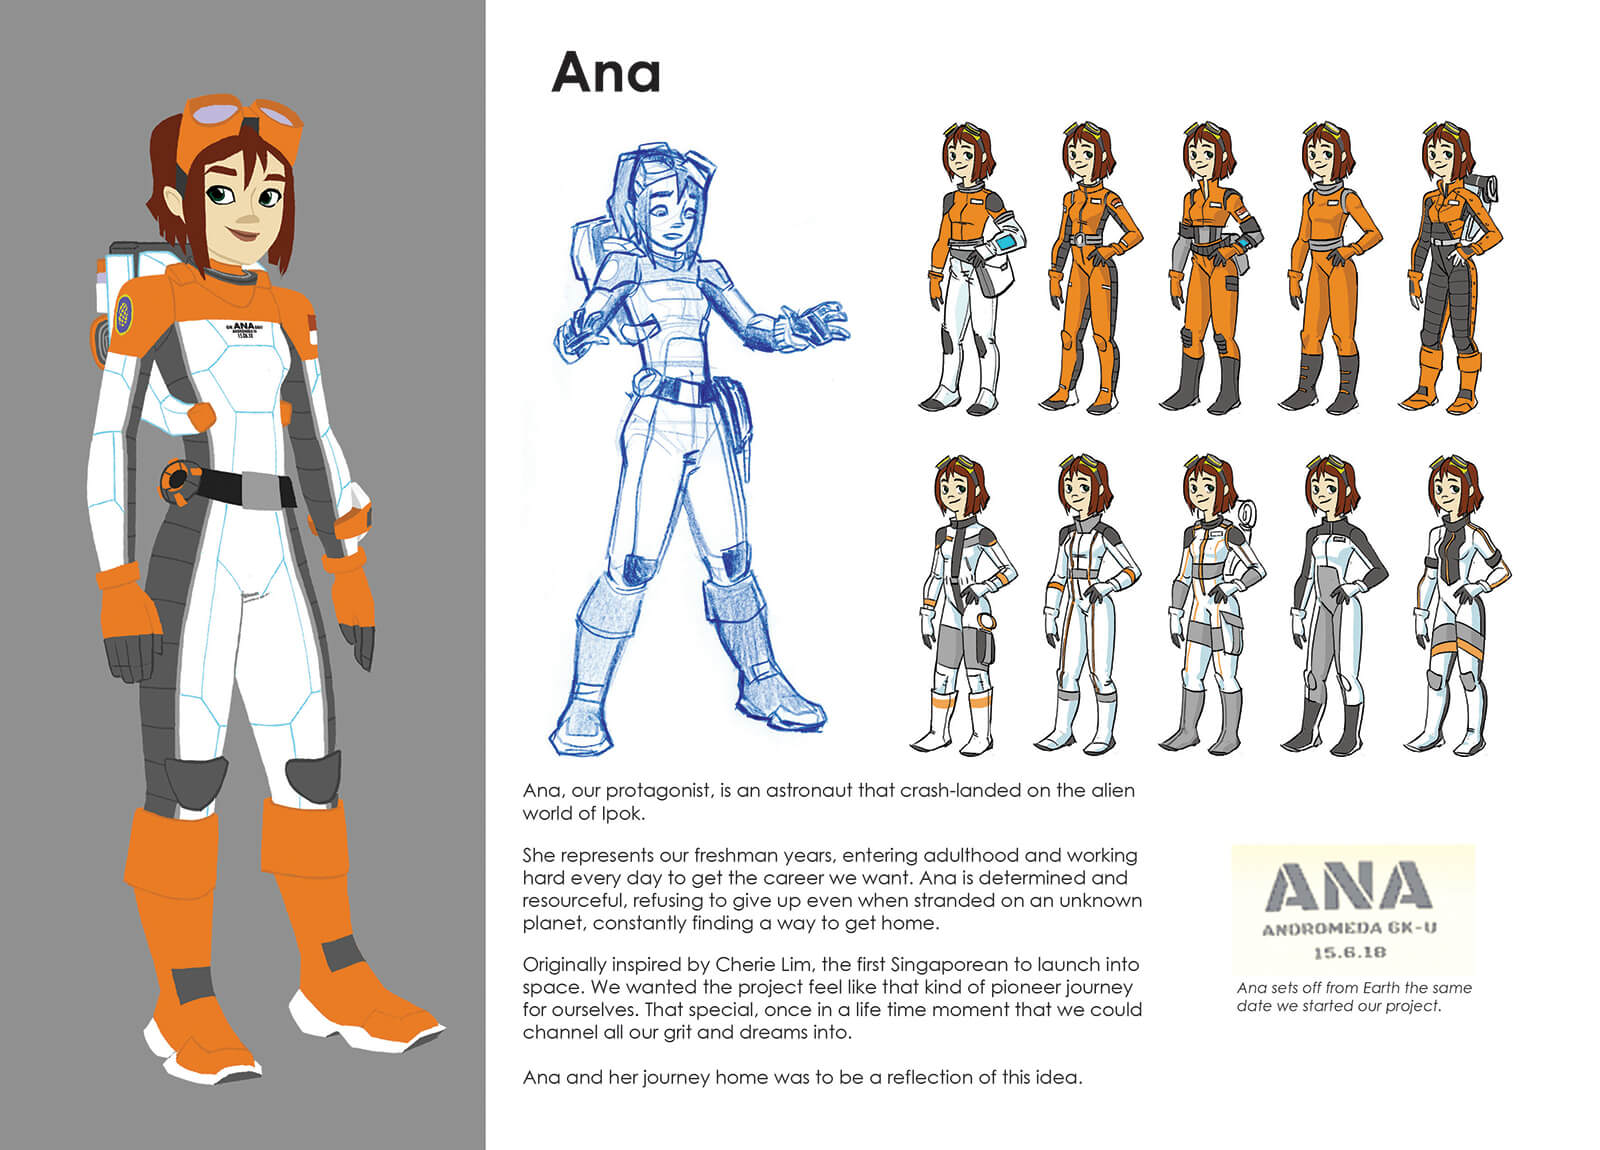 Sketch and description of the character Ana, an astronaut protagonist from The Way Home, in her flight suit.